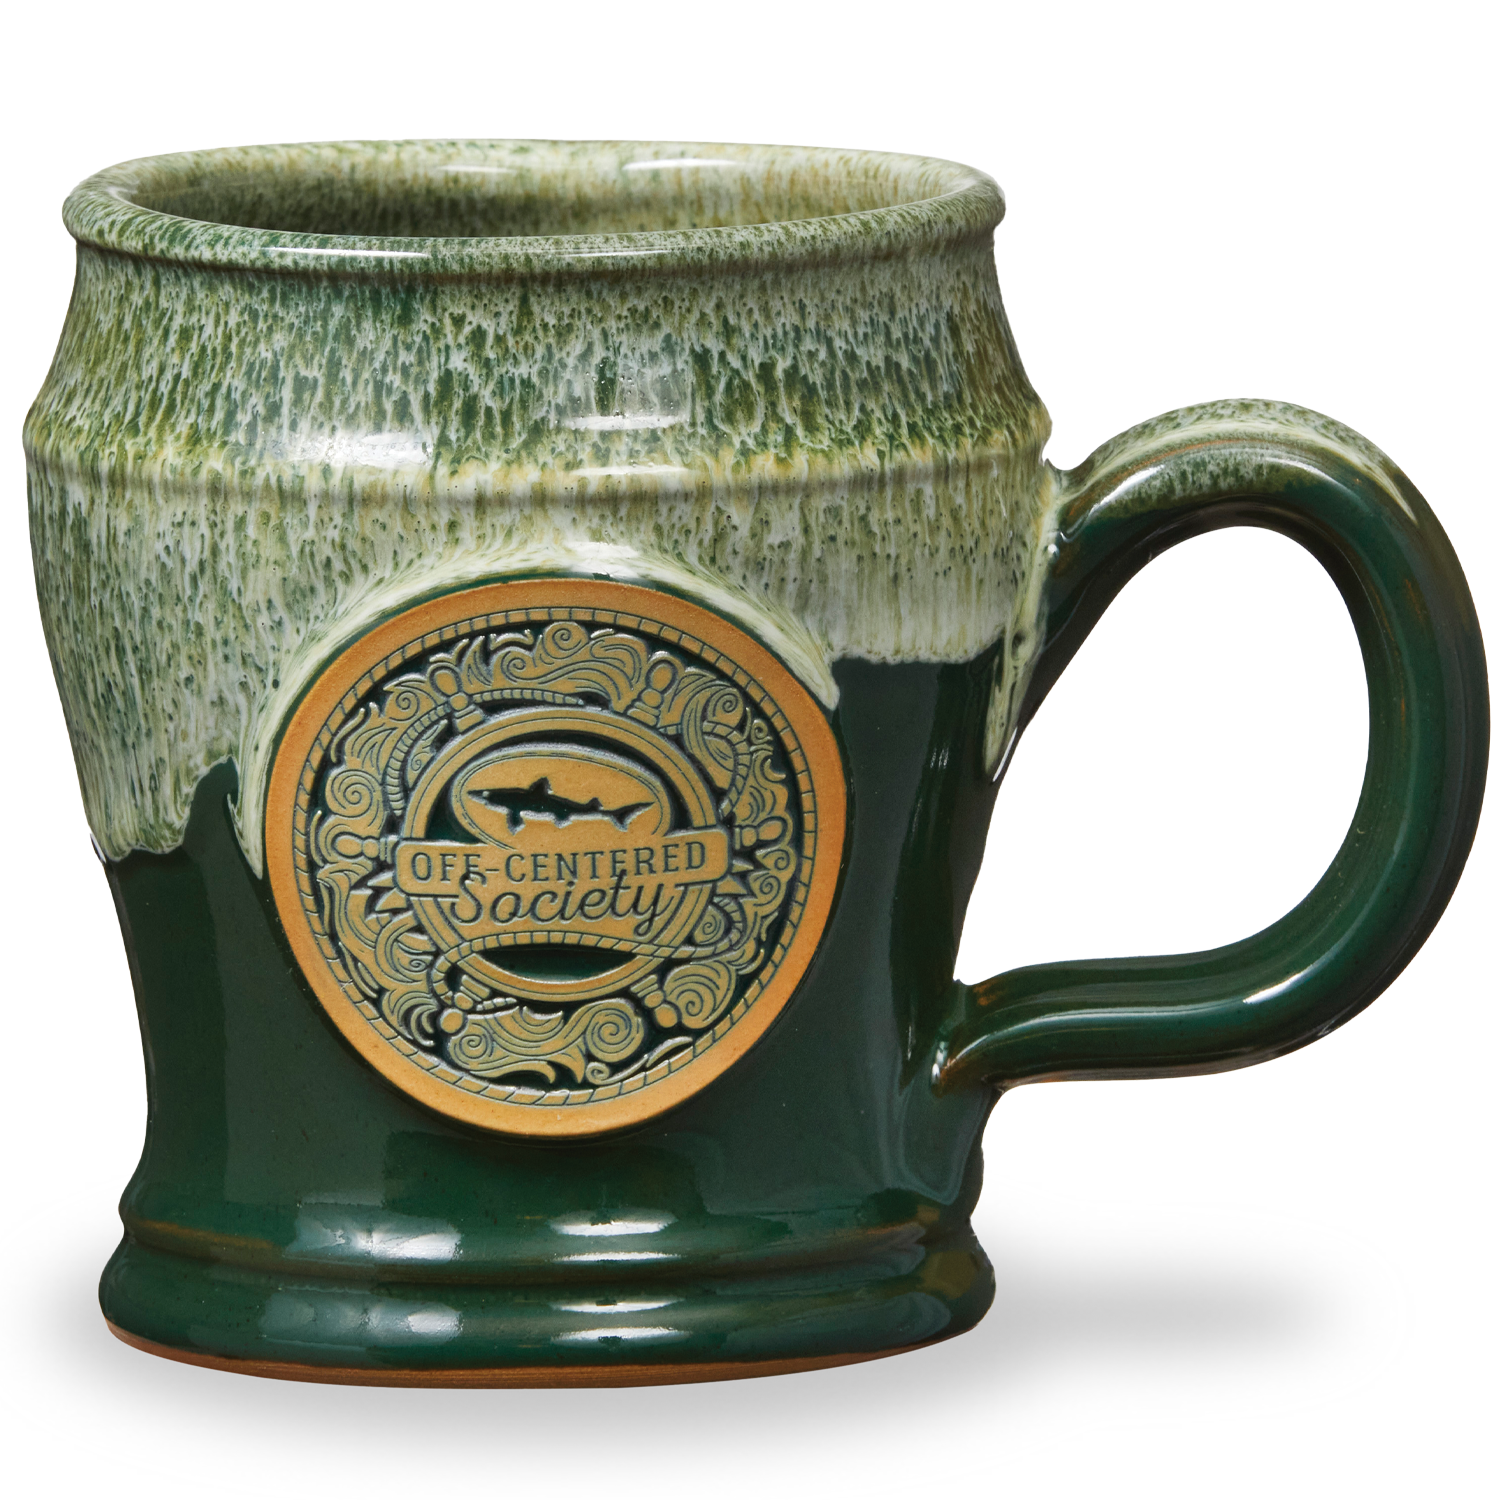 Dogfish Head Brewery <a class='qbutton' href='https://deneenpottery.com/mug-styles/amp/'>View More Details</a>